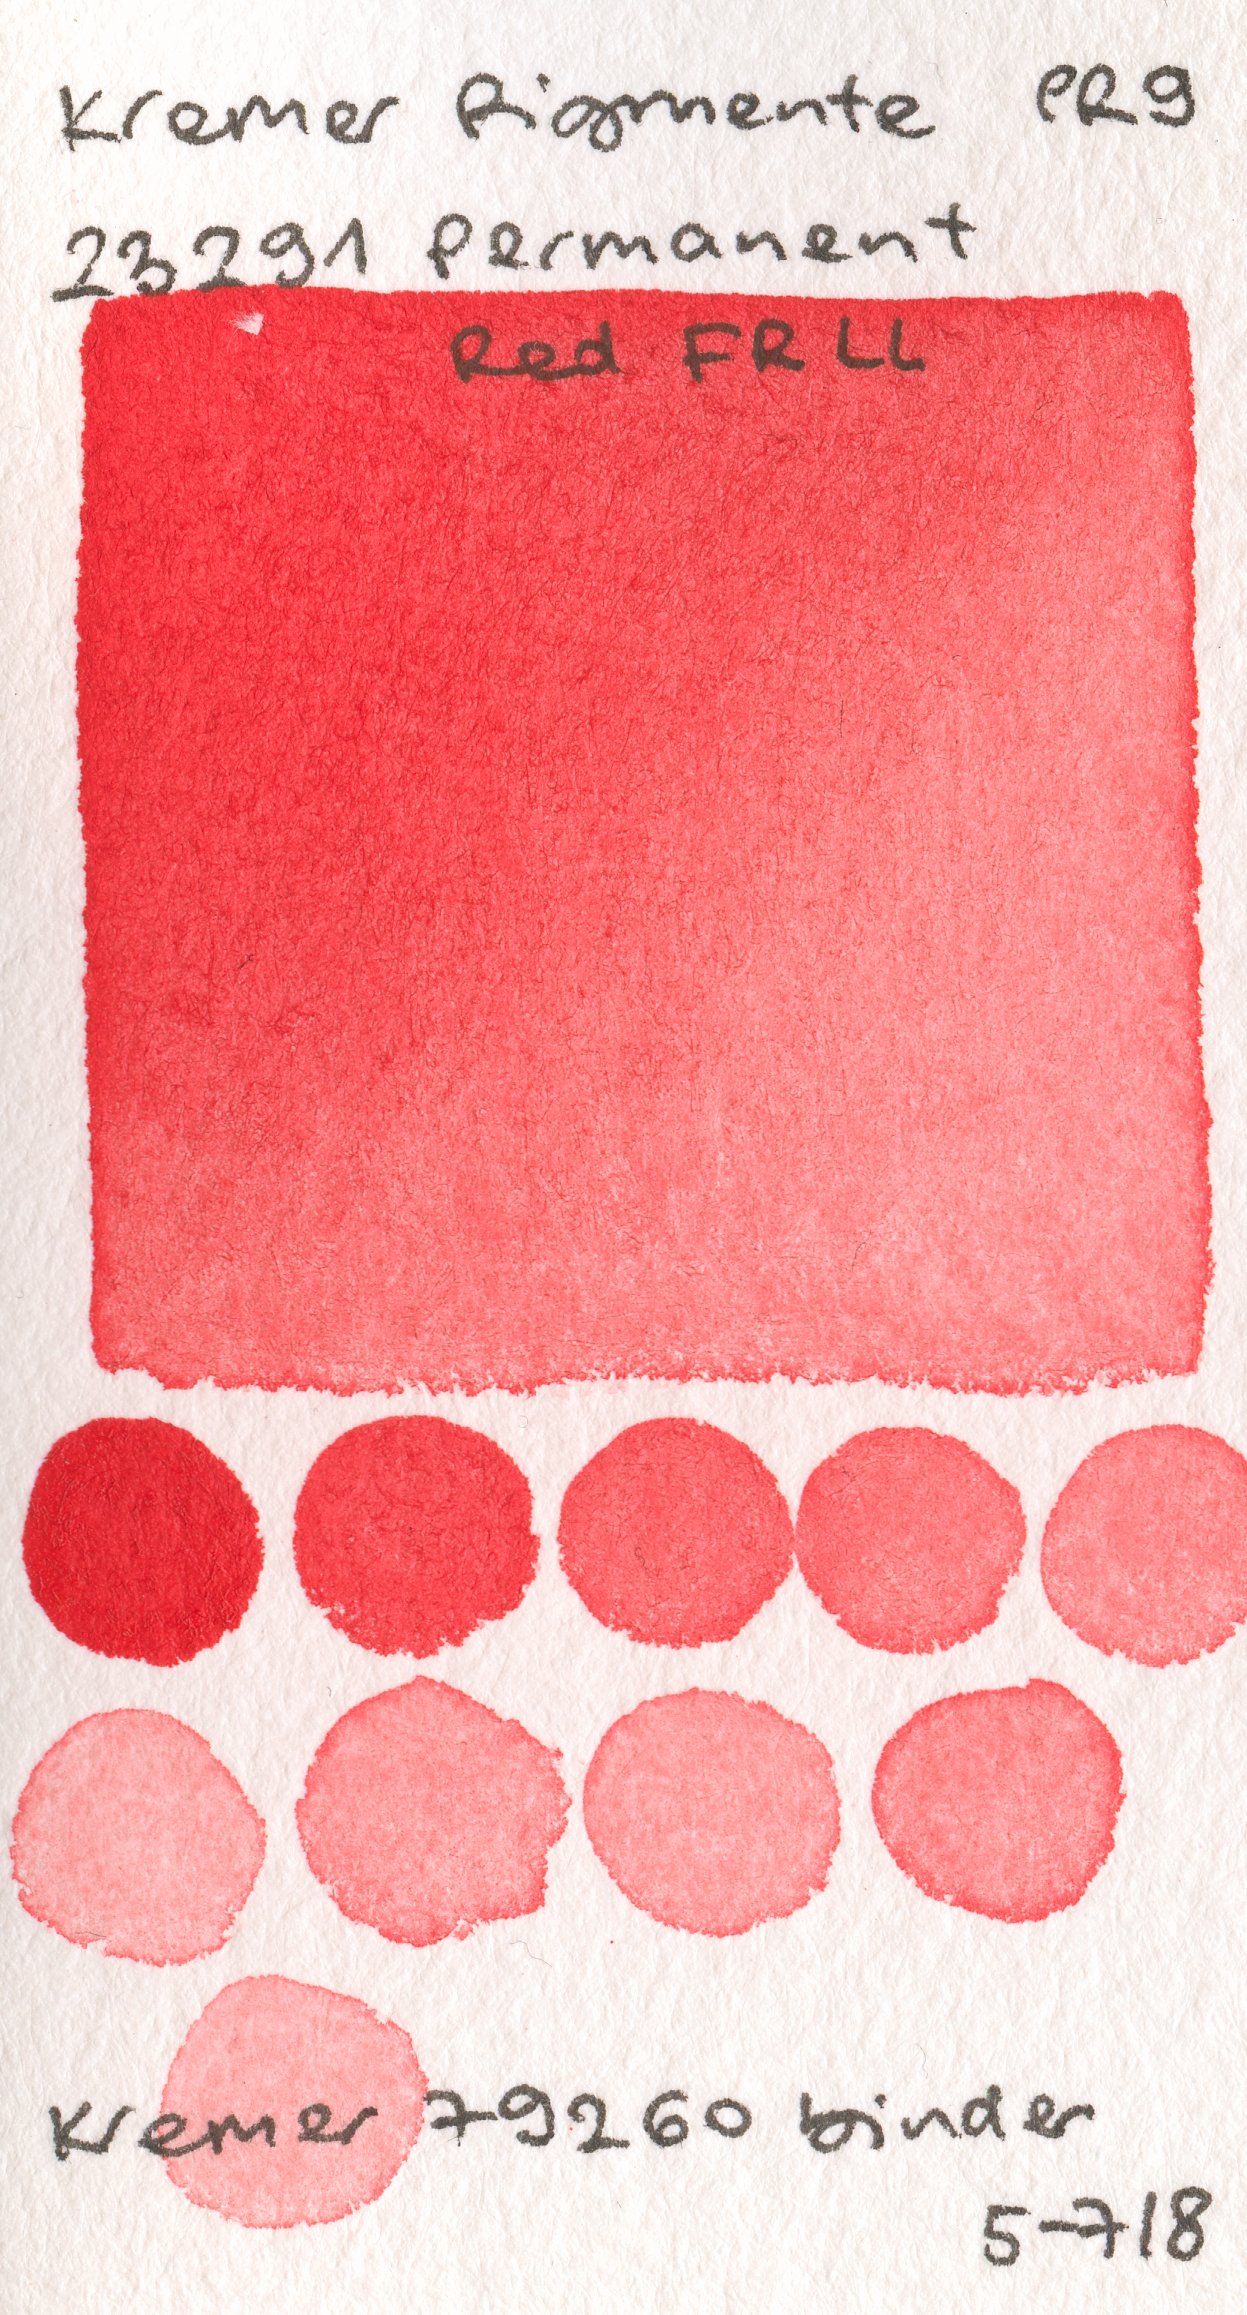 Kremer Pigmente [Dry] Pigments 23291 Permanent Red FRLL PR9 watercolor swatch